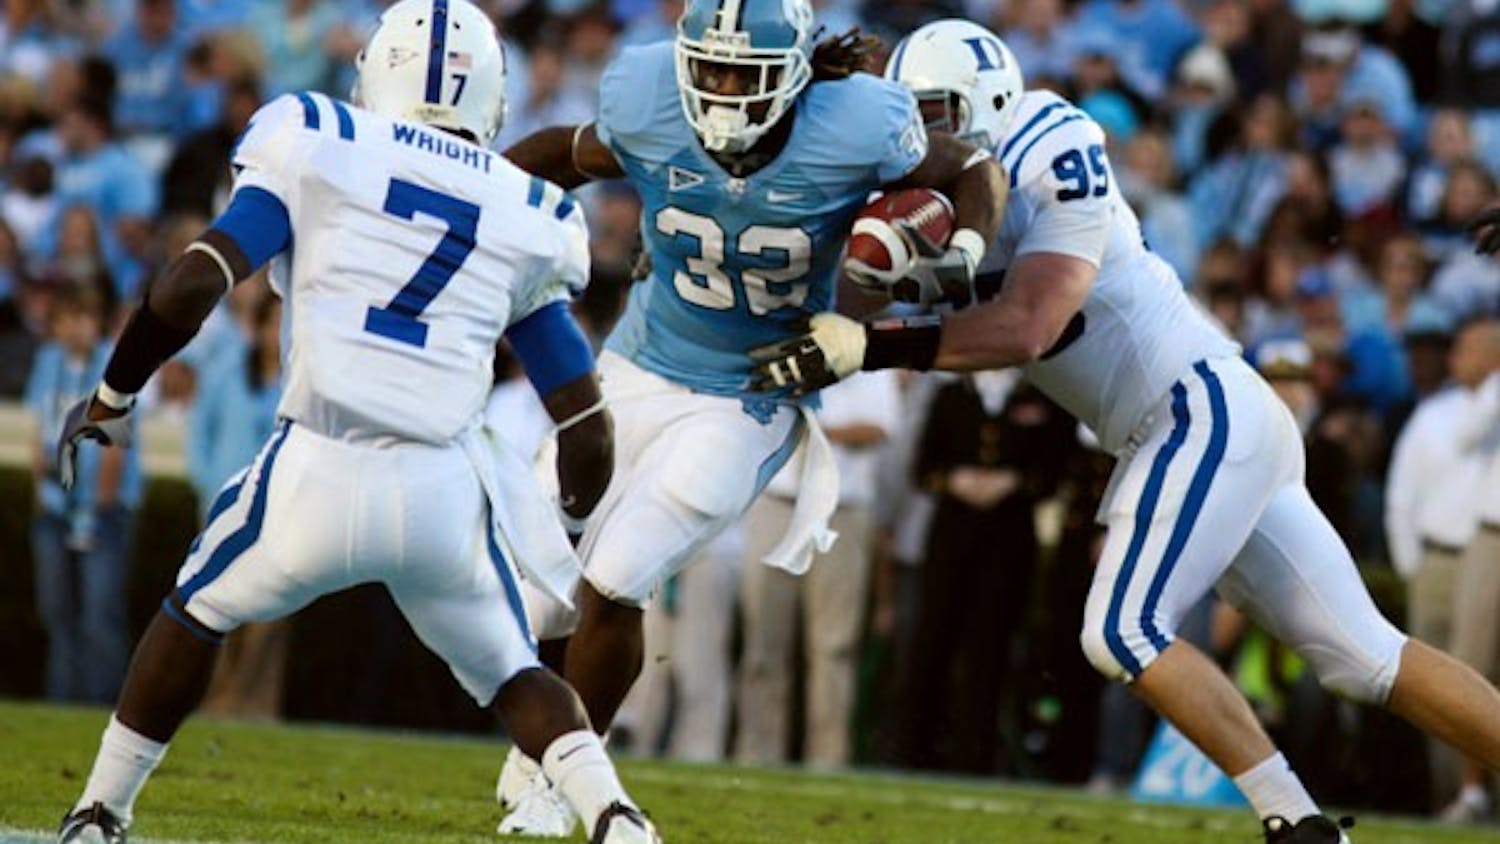 Junior running back Ryan Houston ran for a career-high 164 yards in UNC’s last game. DTH File/Phong Dinh